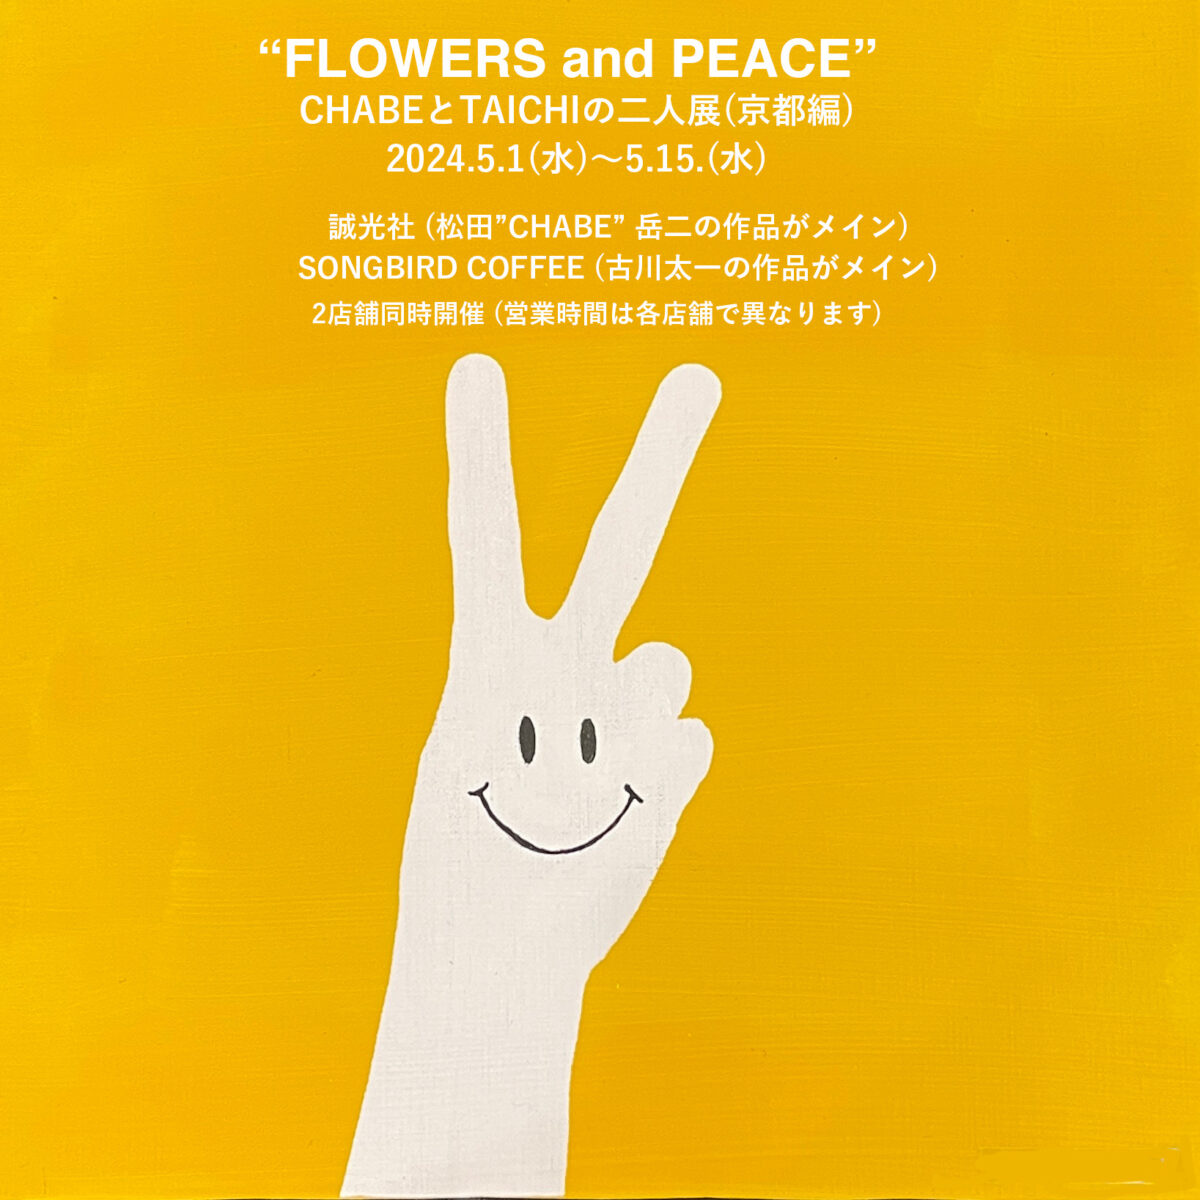 “FLOWERS and PEACE”